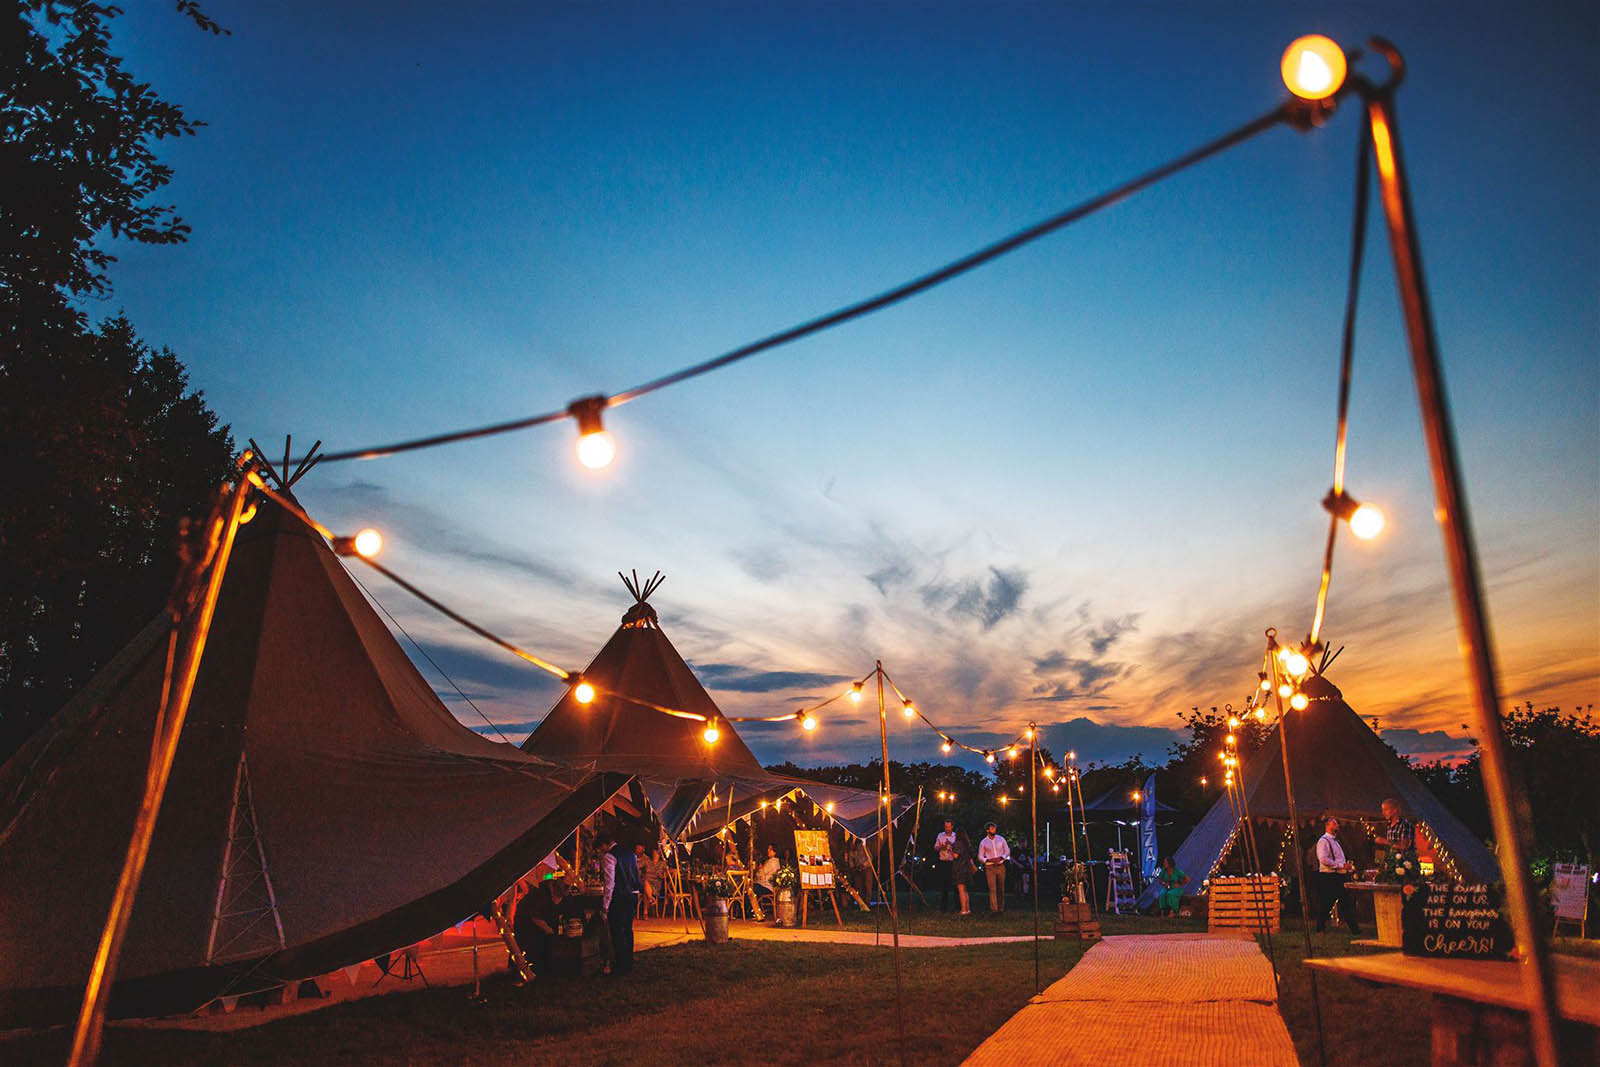 Tipis at sunset with festoon lighting, from the Orchard at Munsley in Herefordshire